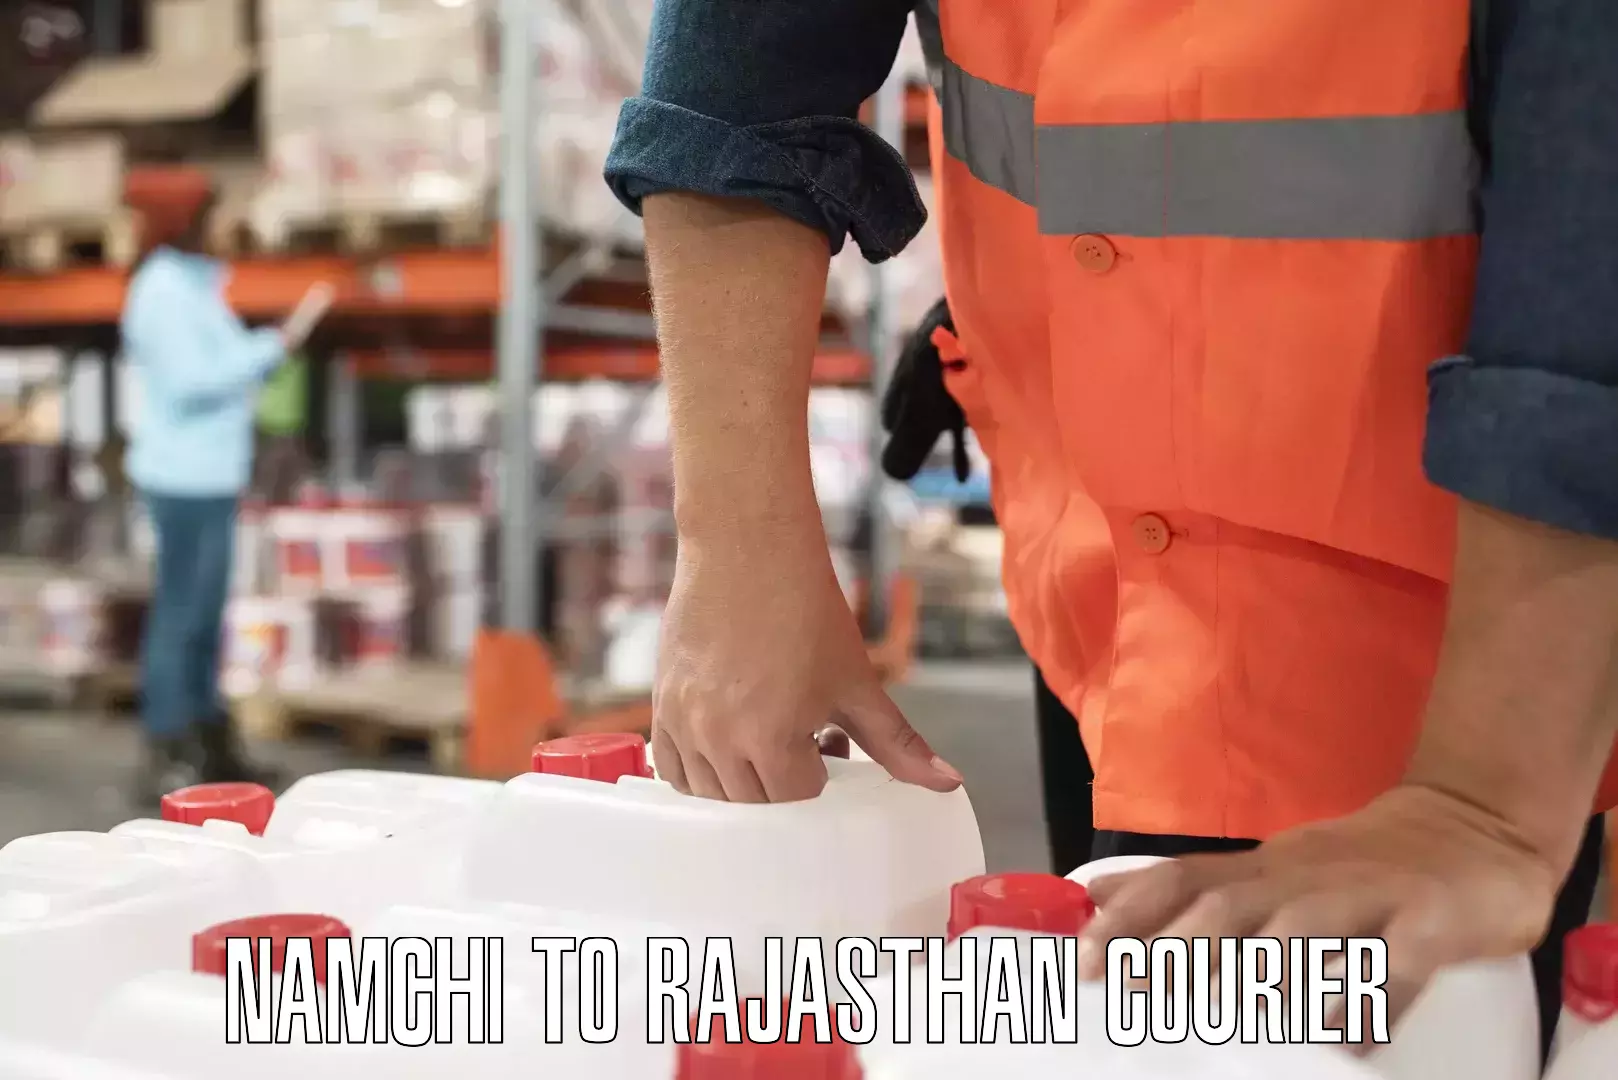 Next-day delivery options Namchi to Rajasthan